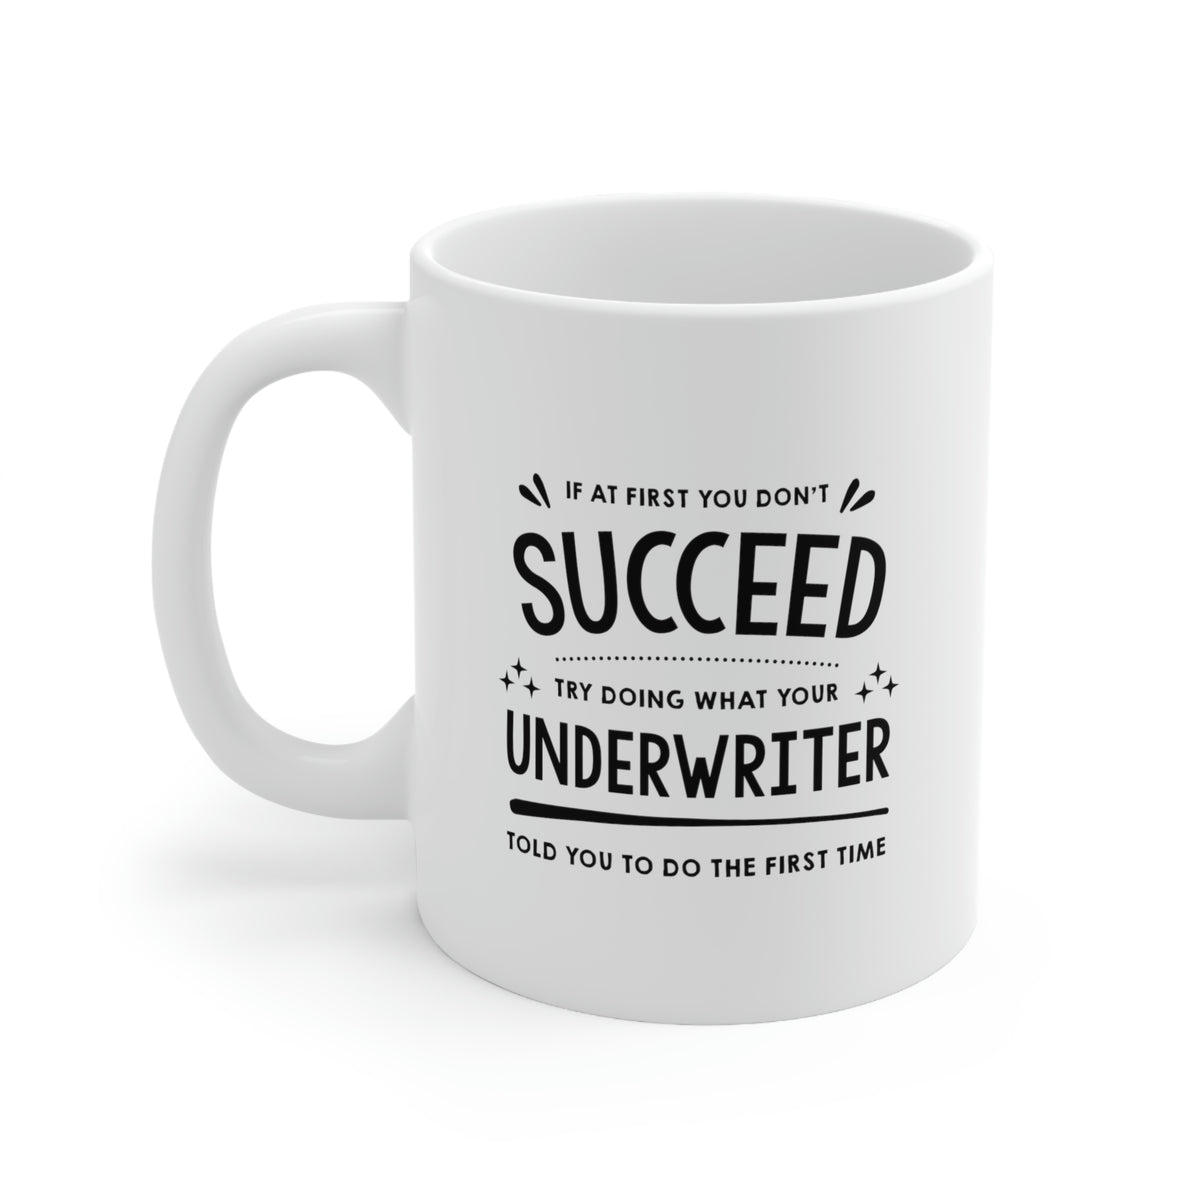 Underwriter Coffee Mug - If At First You Don't Succeed - Funny Sarcasm Christmas Gifts for Men Women Retired Coworkers